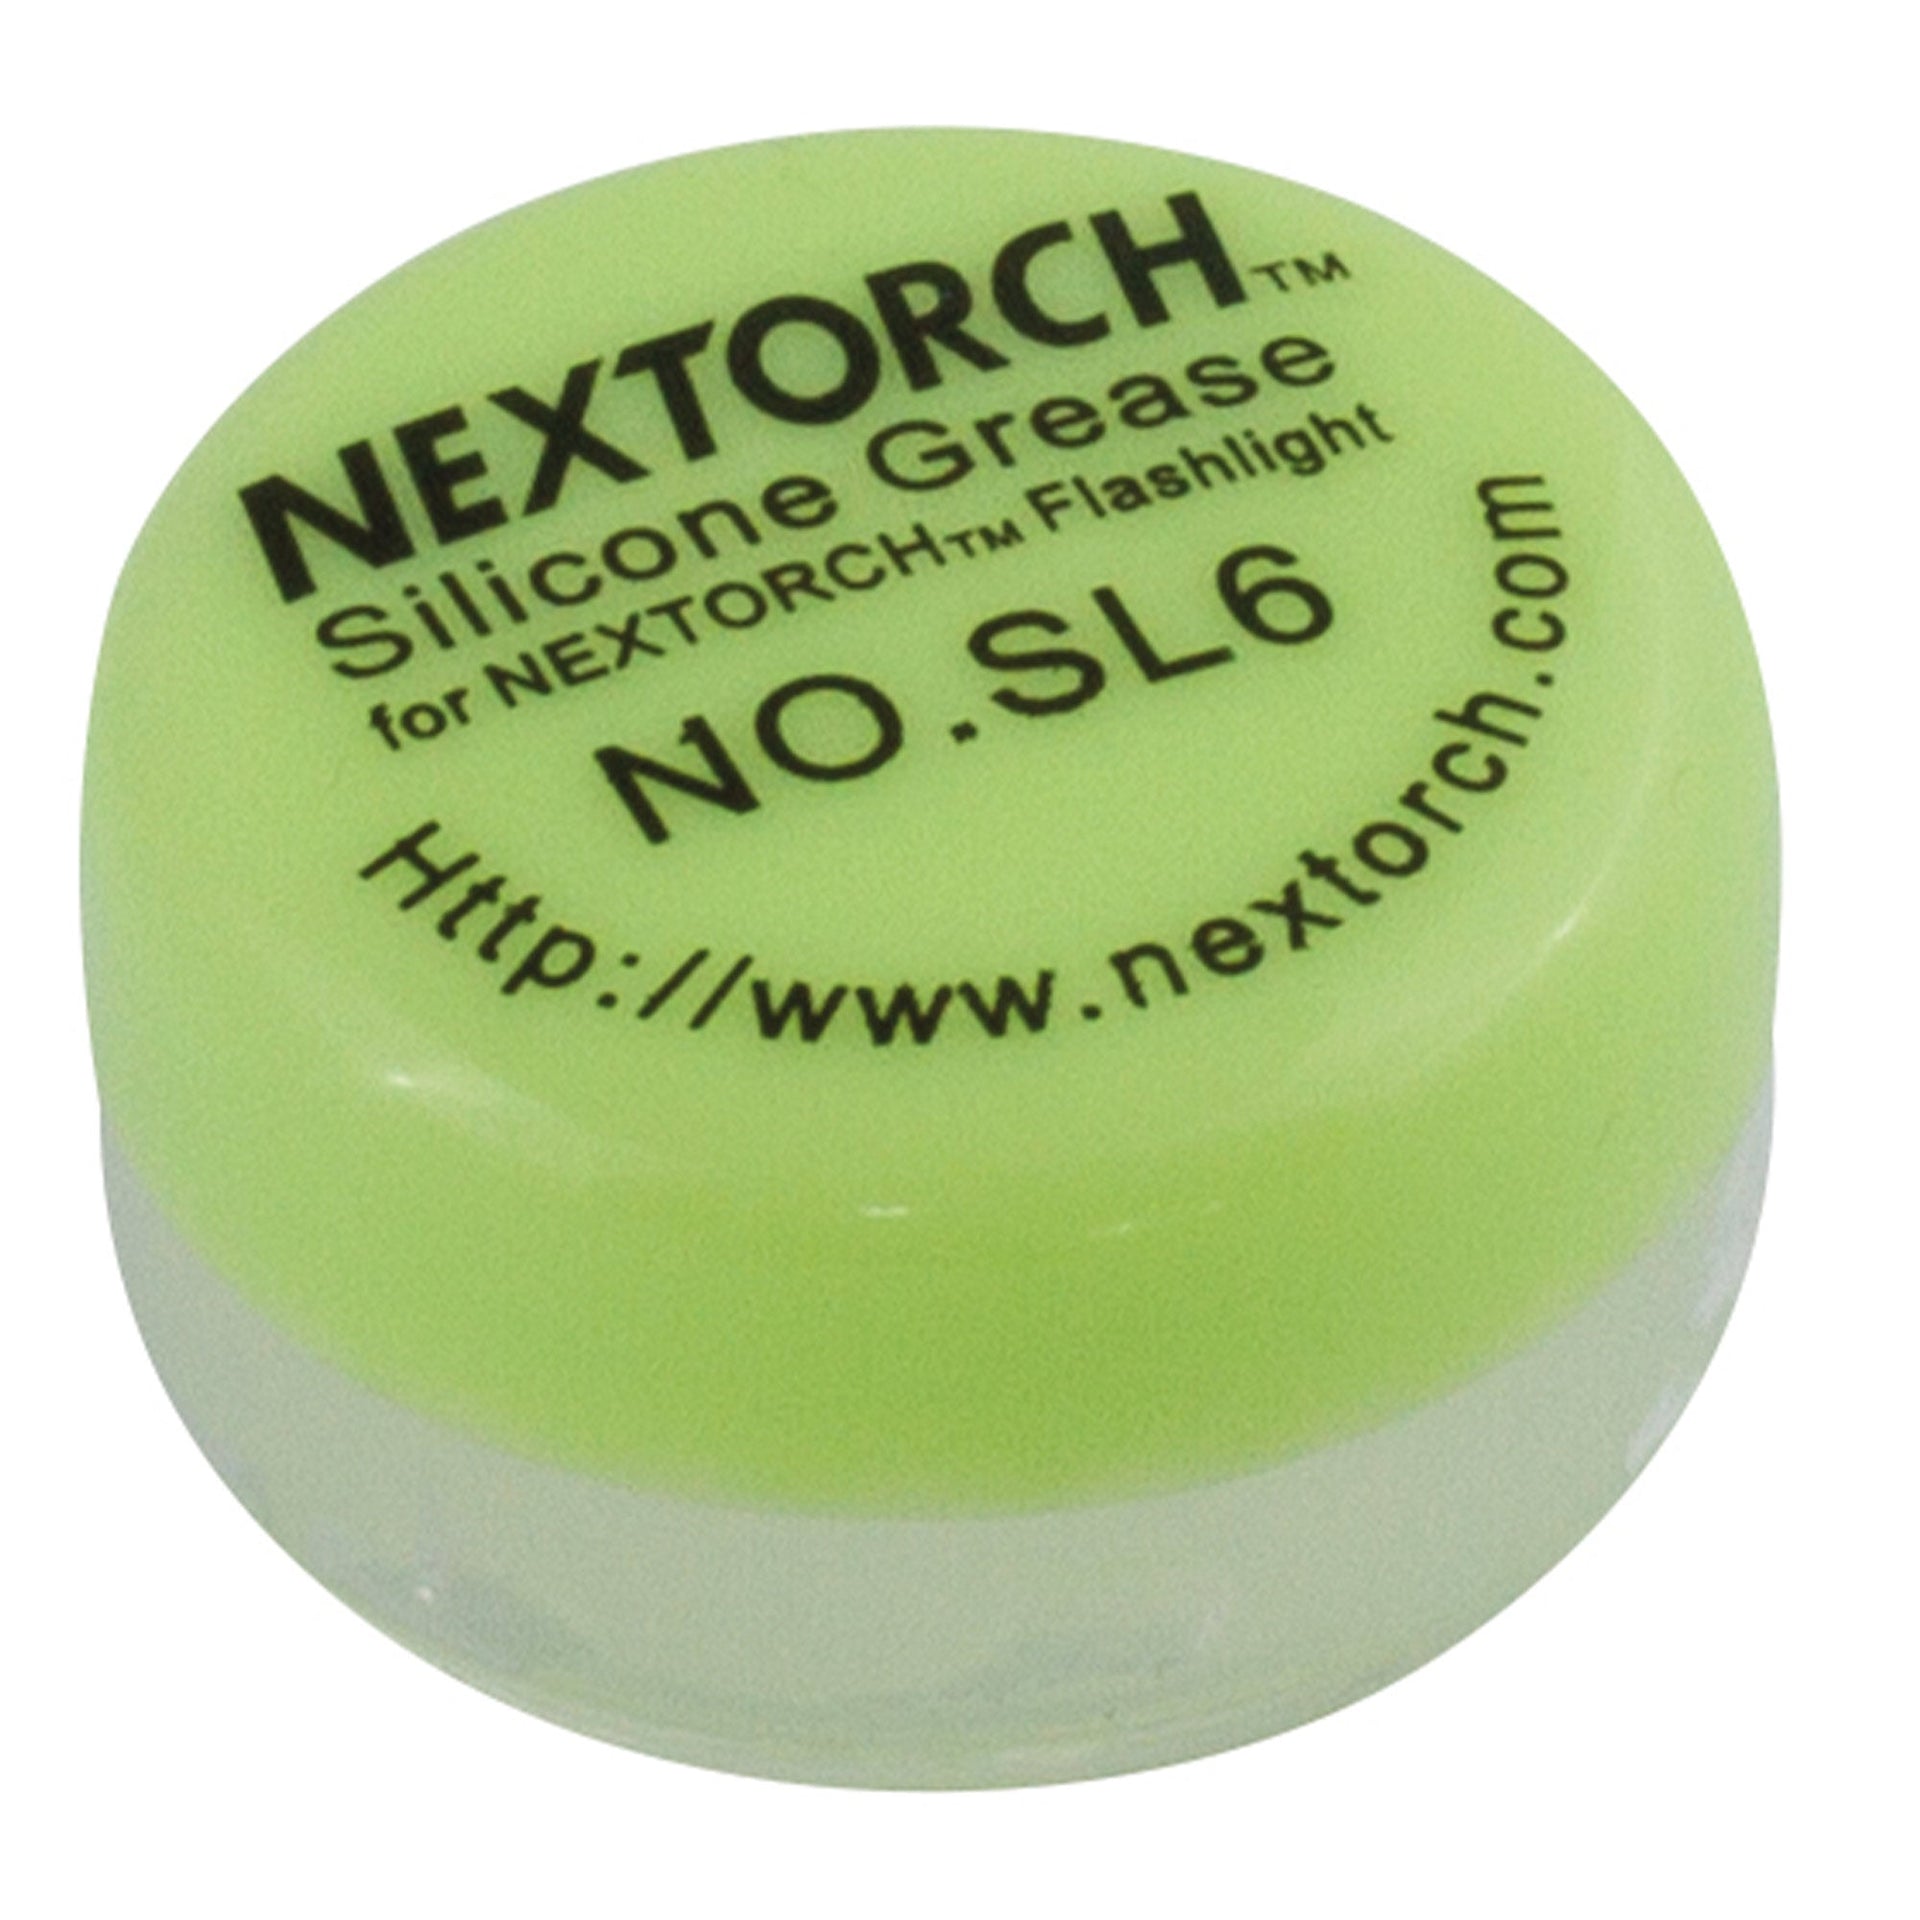 Silicone Grease SL6 for Flashlights